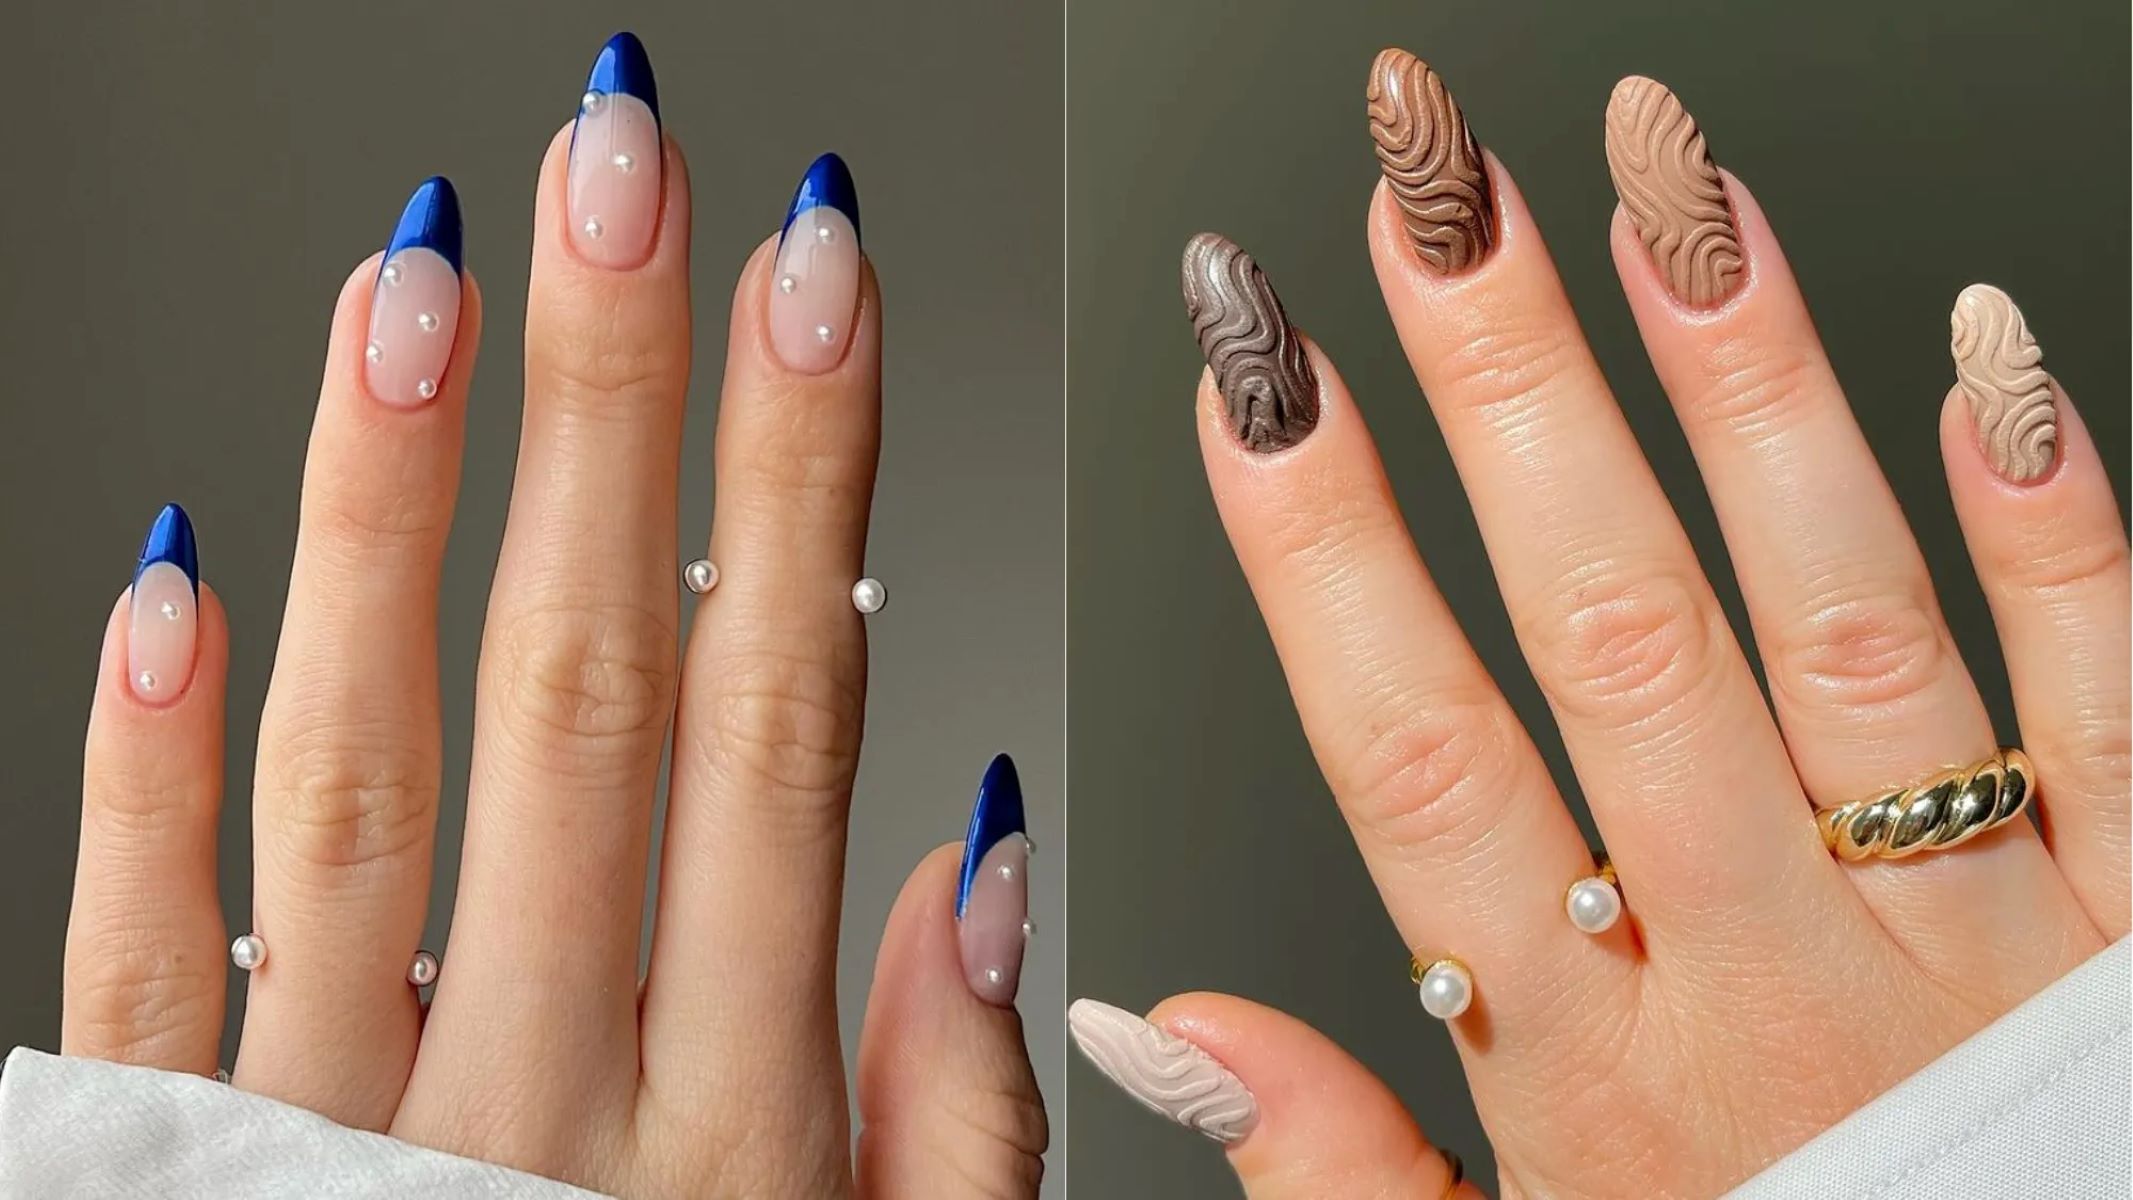 Discover The Hottest Acrylic Nail Shapes For A Trendy Look!